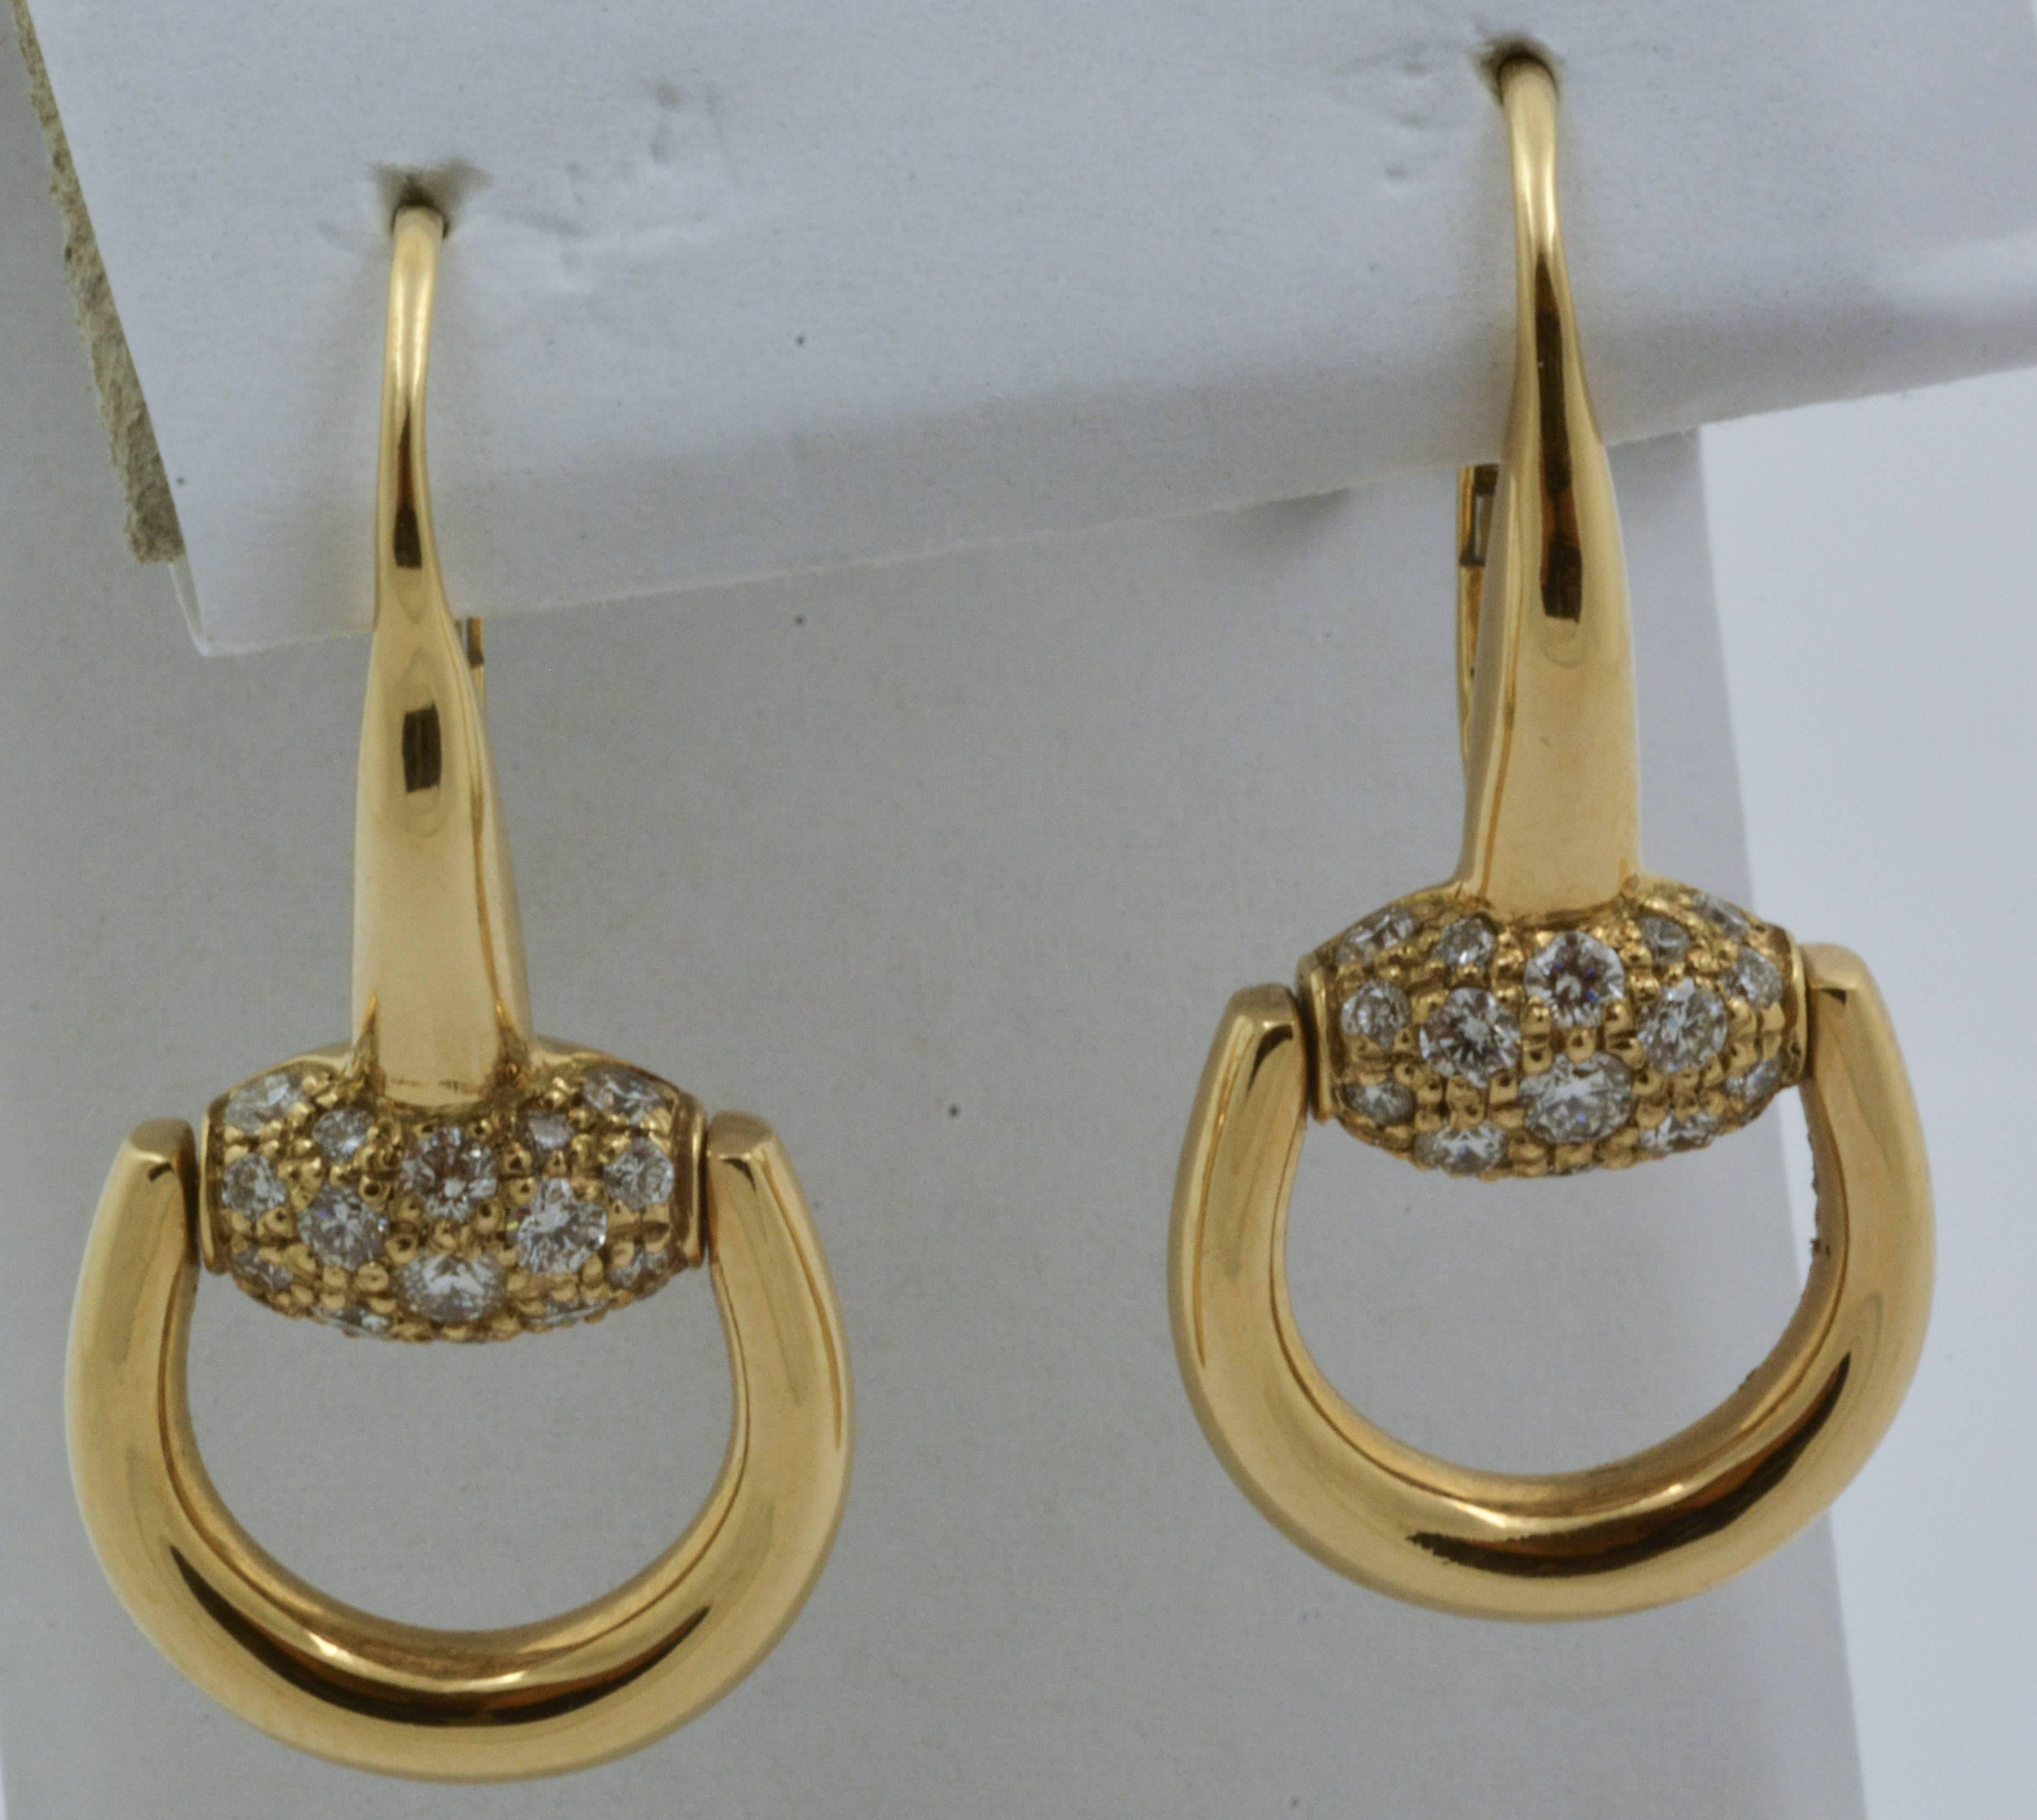 Forty-eight round, brilliant-cut diamonds (0.85 carats, clarity VVS, color G-H) create a sparkle that makes these Gucci-designed earrings unique and lovely. Fashioned from 18kt yellow gold, these horesbit earrings are sure to be noticed.